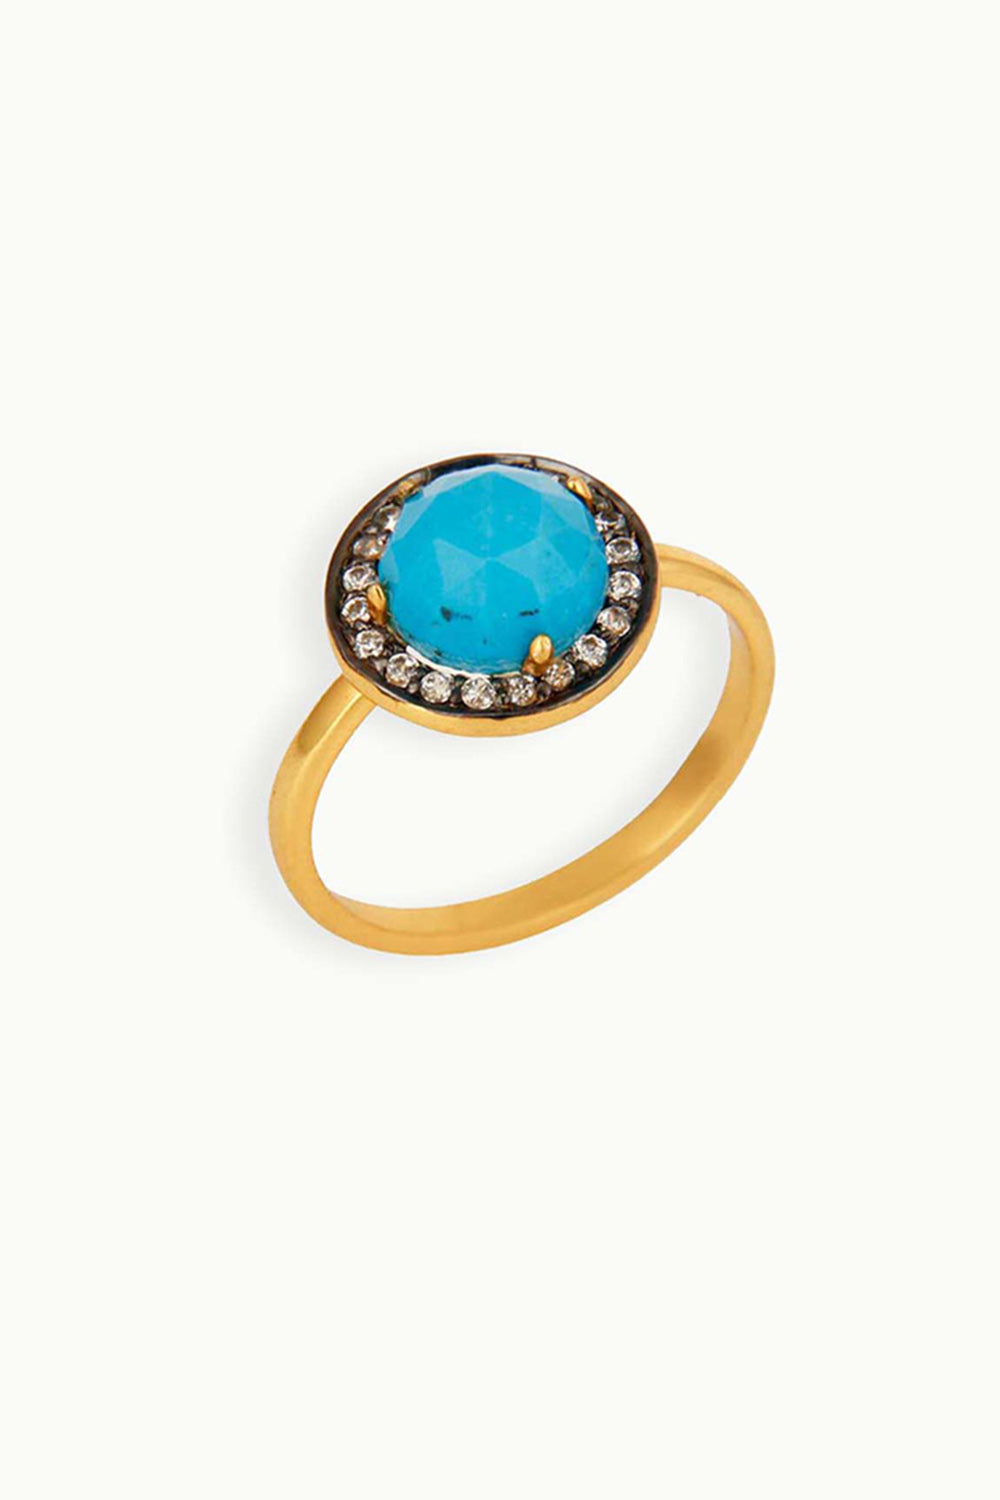 Sivalya Turquoise Gold Vermeil Ring - Halo